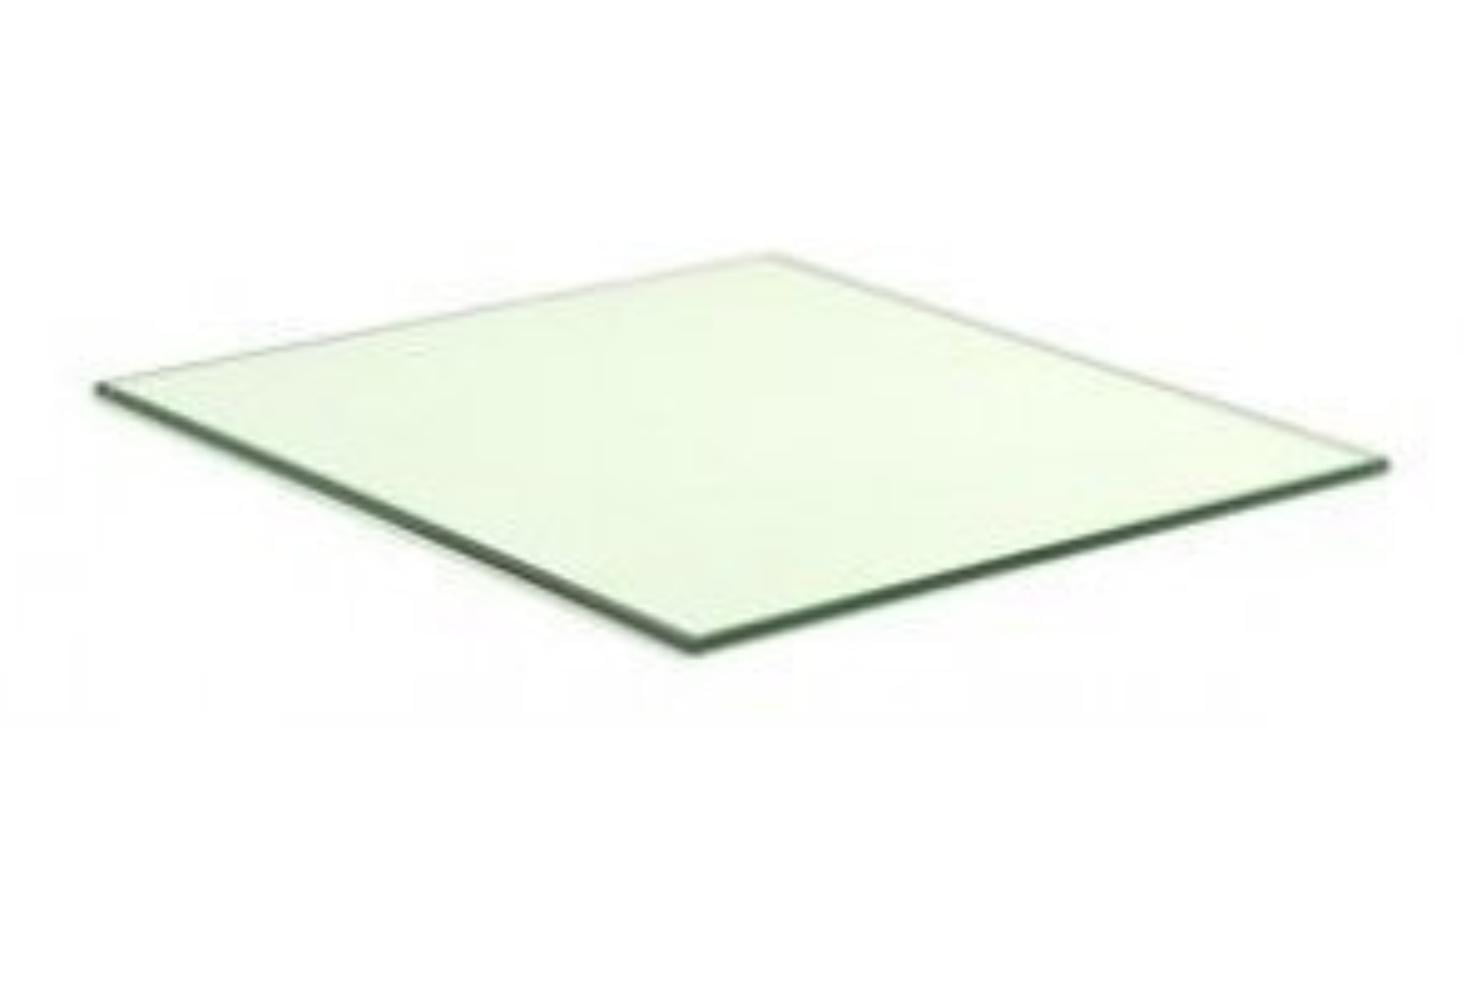 Tempered Glass Panel 12” x 12” x 3/16” Never used 